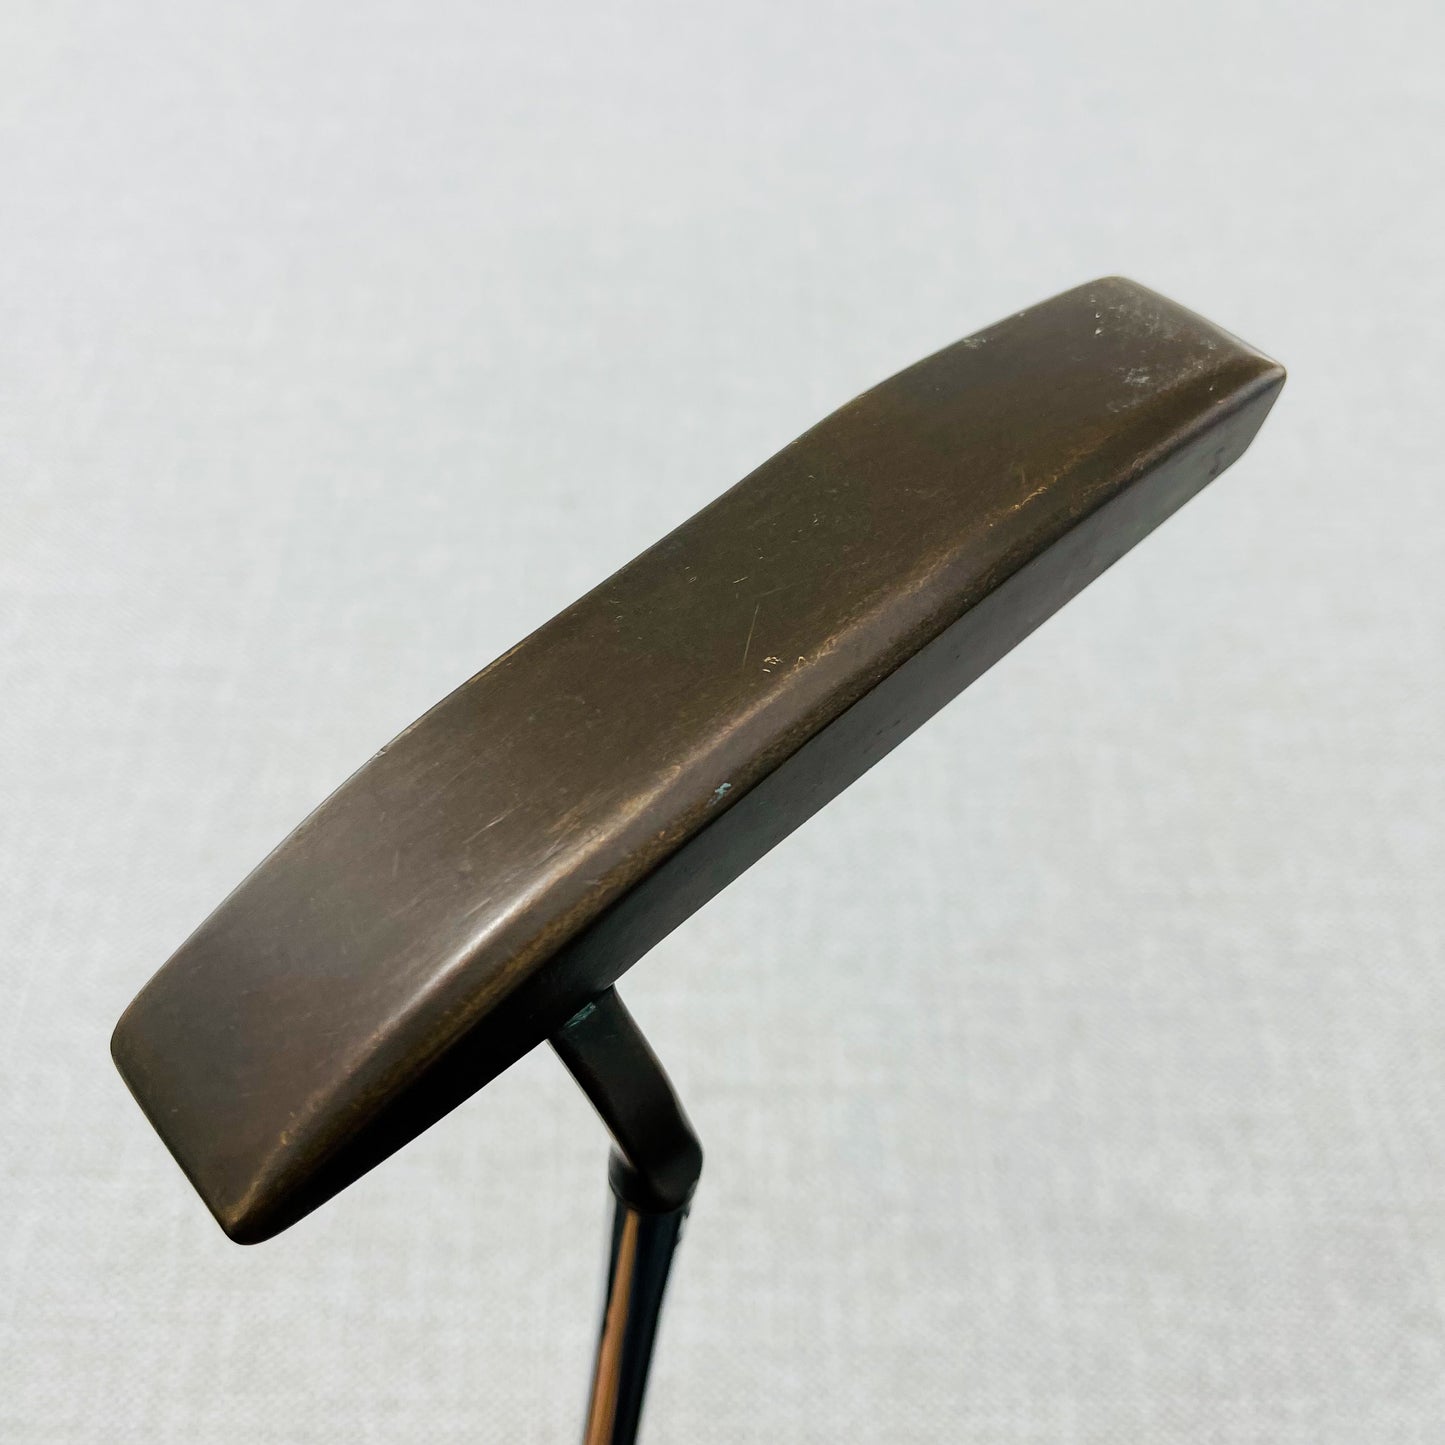 PING Pal 6 Beryllium Copper (BeCu) Putter. 34 inch - Very Good Condition # T905